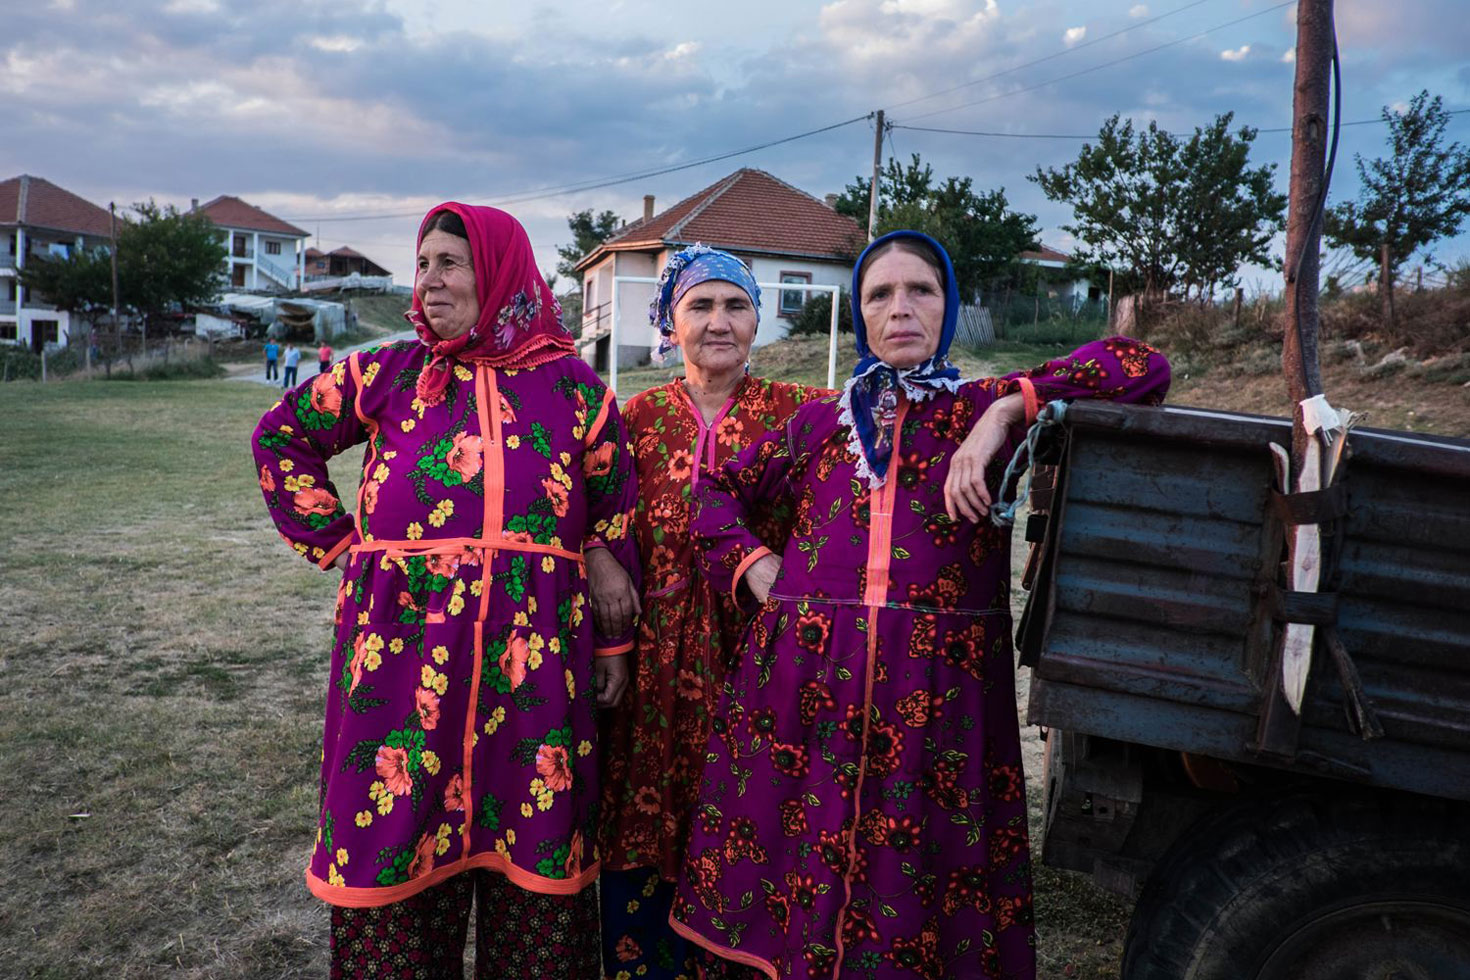 "The contradiction between the traditional and the contemporary way of life is reflected in the contrast between the male and female Yörük population - the women with their colorful and archaic traditional gowns... and the men who have adopted the contemporary way of behavior and dressing."